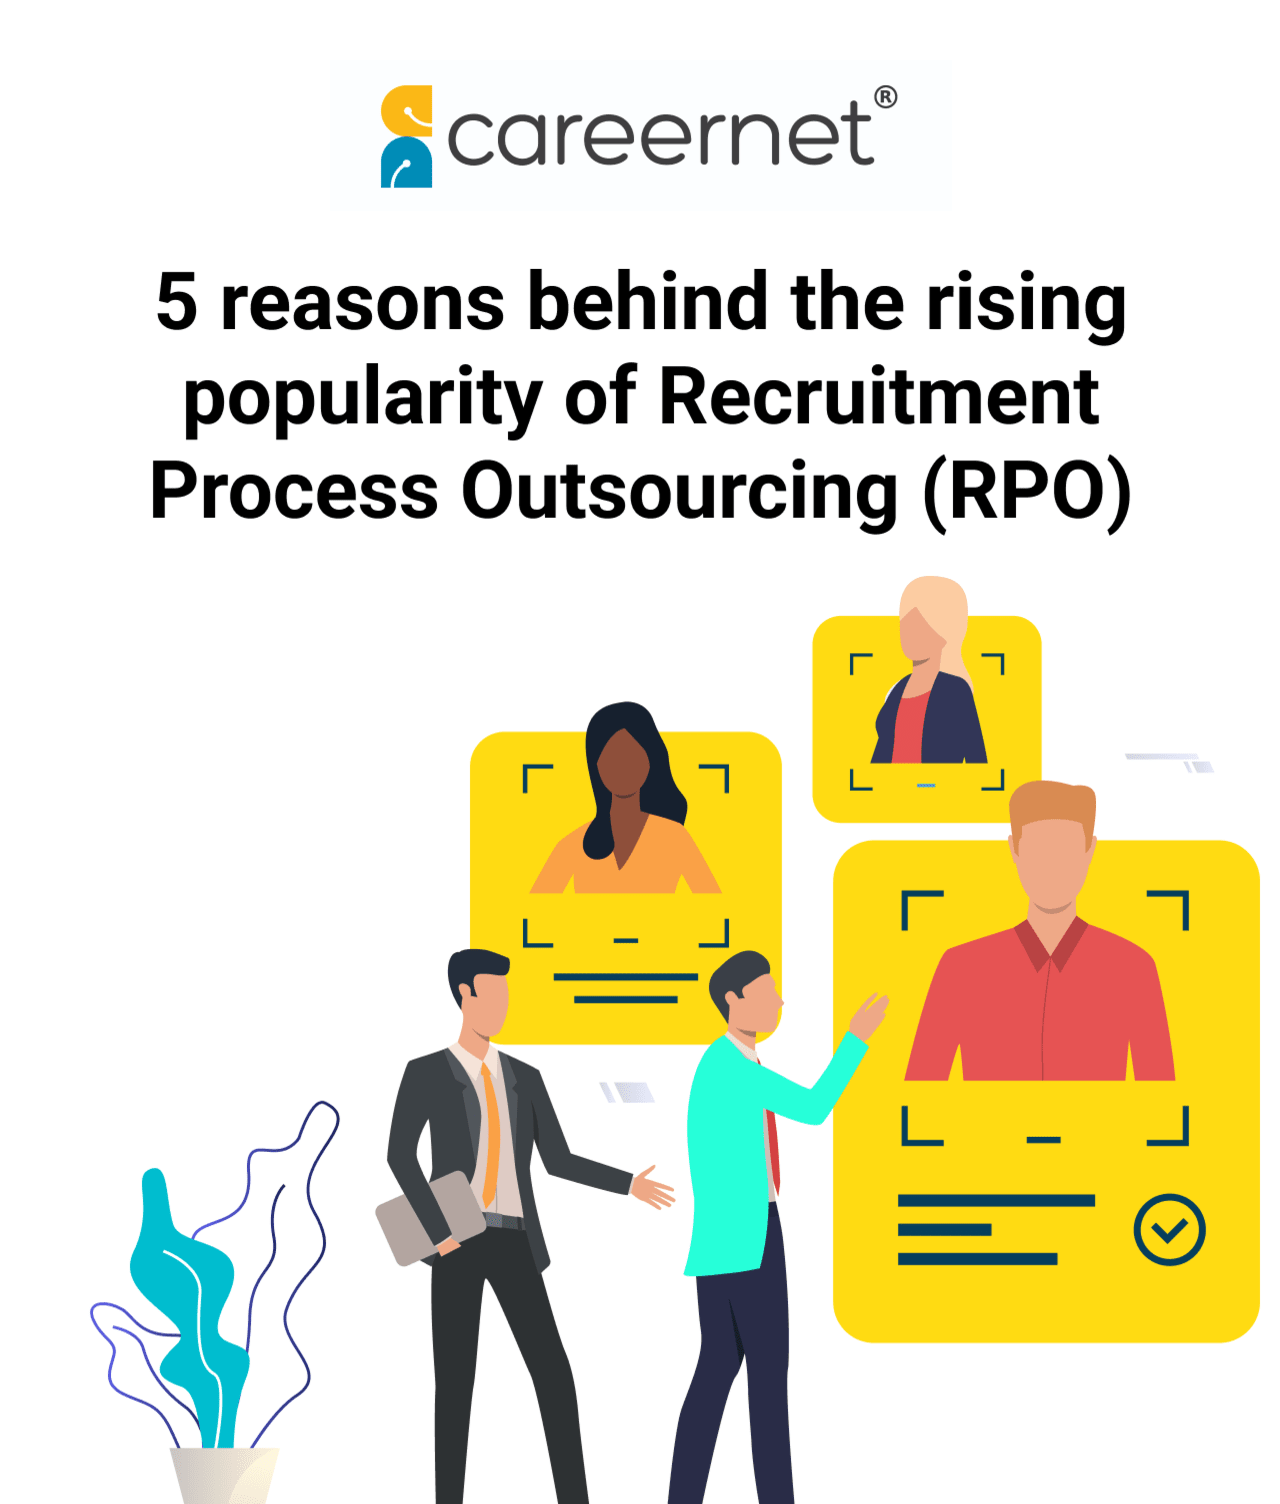 Why Recruitment Process Outsourcing (RPO) has become popular